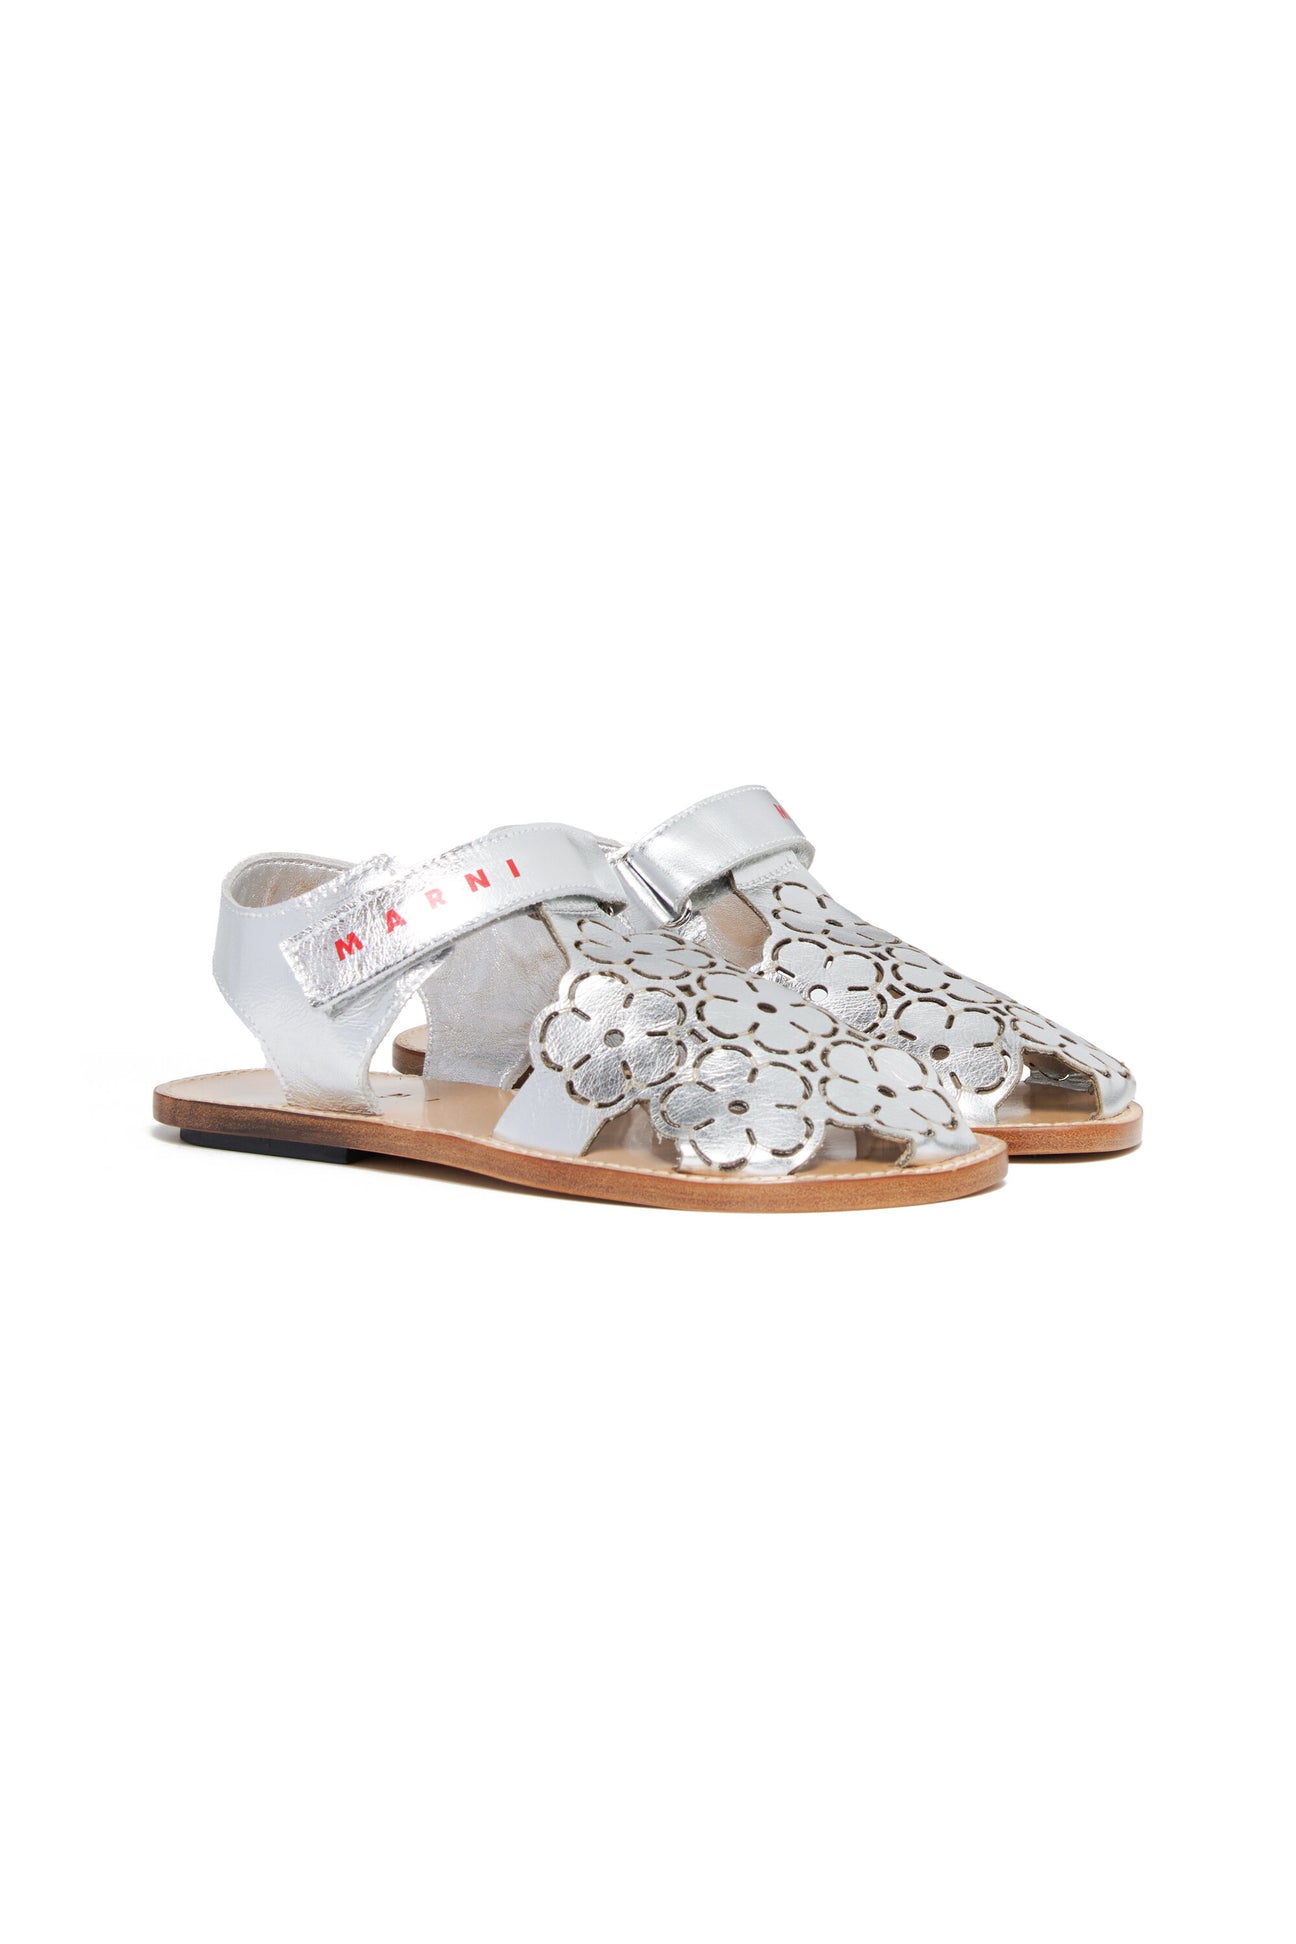 Fisherman sandals with floral pattern Fisherman sandals with floral pattern